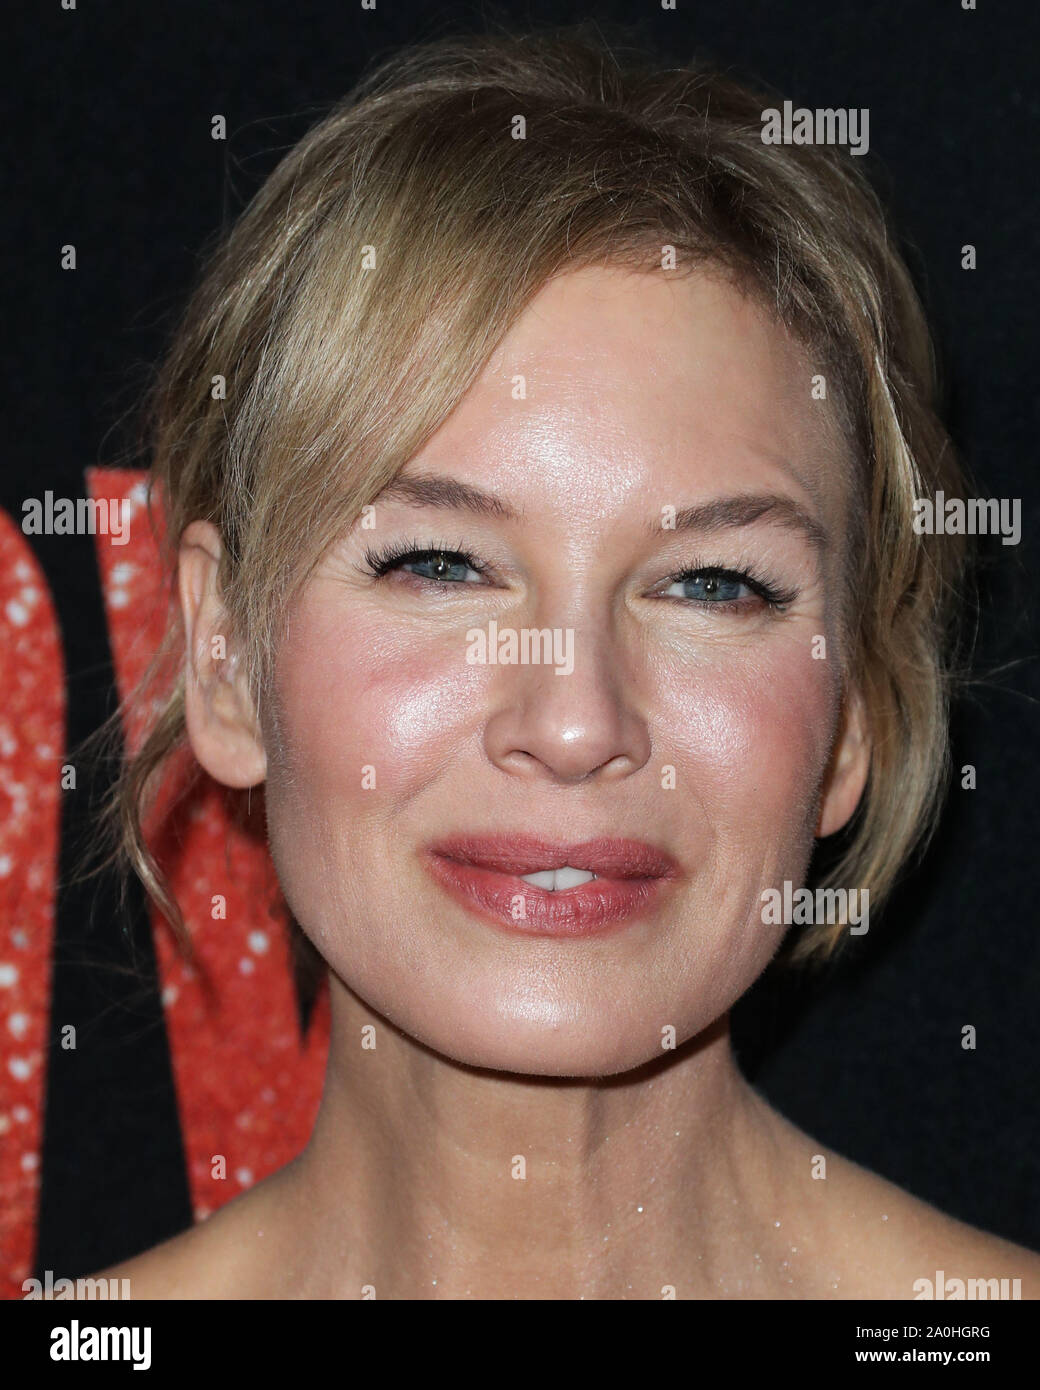 Beverly Hills, United States. 19th Sep, 2019. BEVERLY HILLS, LOS ANGELES, CALIFORNIA, USA - SEPTEMBER 19: Actress Renee Zellweger wearing an Oscar de la Renta dress arrives at the Los Angeles Premiere Of Roadside Attraction's 'Judy' held at the Samuel Goldwyn Theater at the Academy of Motion Picture Arts and Sciences on September 19, 2019 in Beverly Hills, Los Angeles, California, United States. (Photo by Xavier Collin/Image Press Agency) Credit: Image Press Agency/Alamy Live News Stock Photo